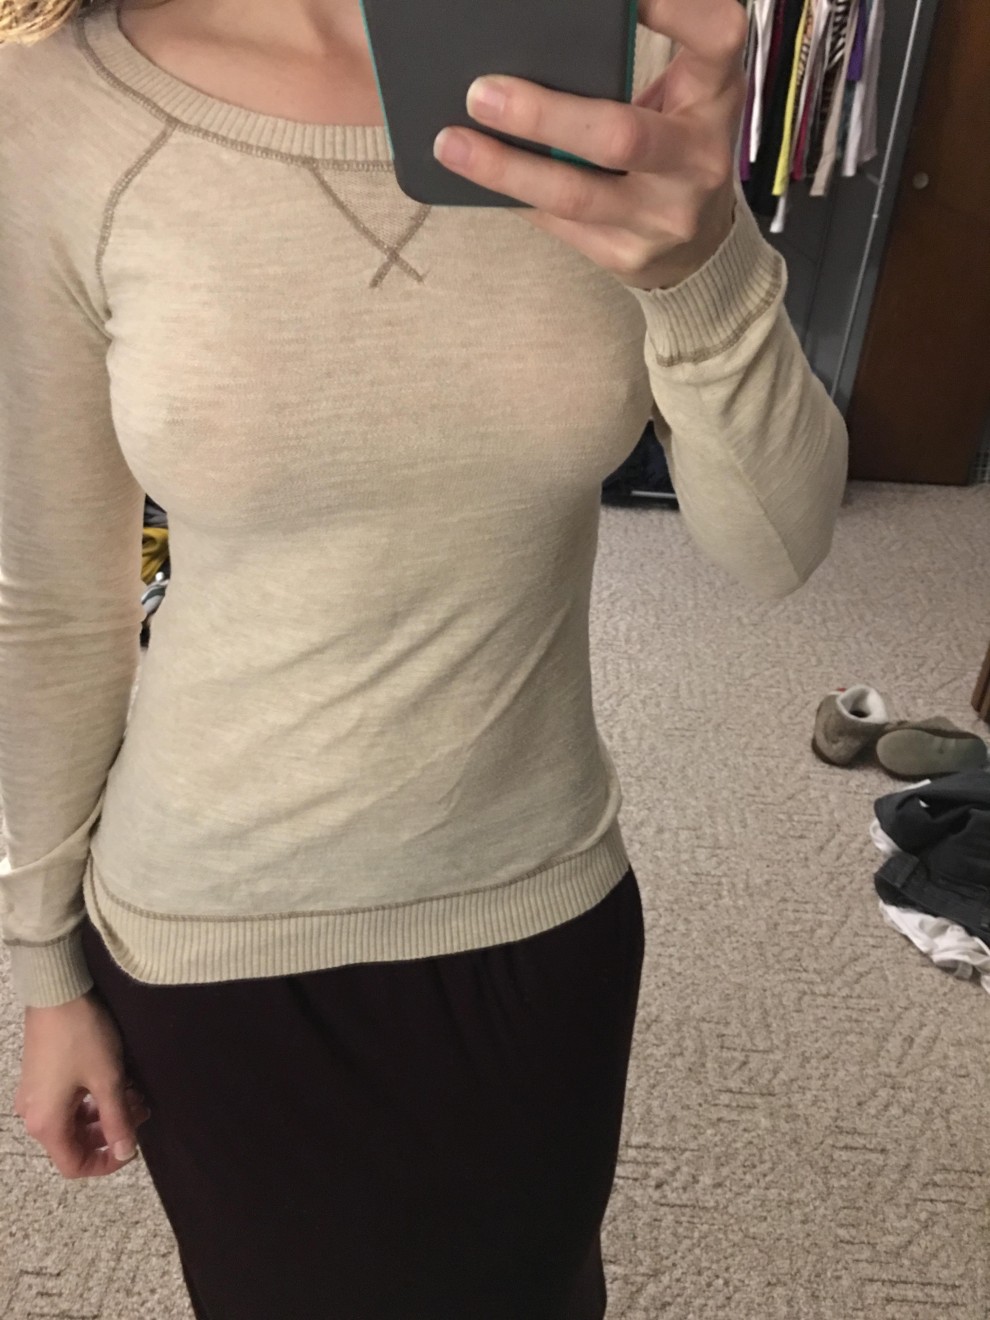 Should I have stayed braless? [f]